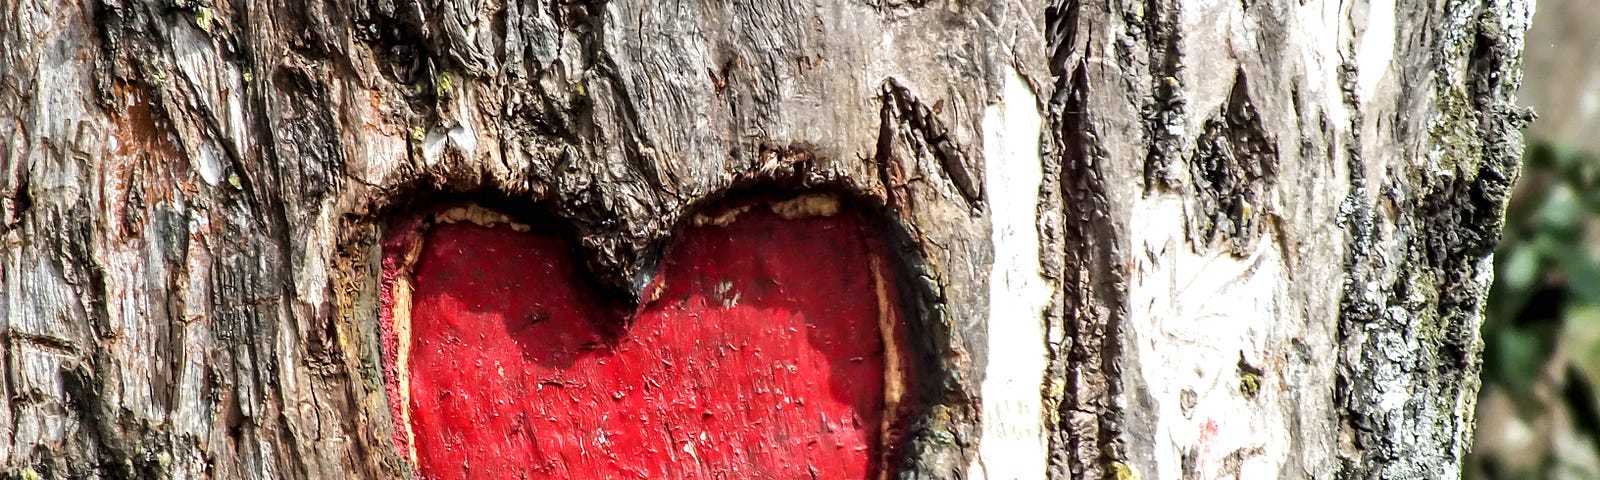 Heart carved deep into a tree, and painted red.